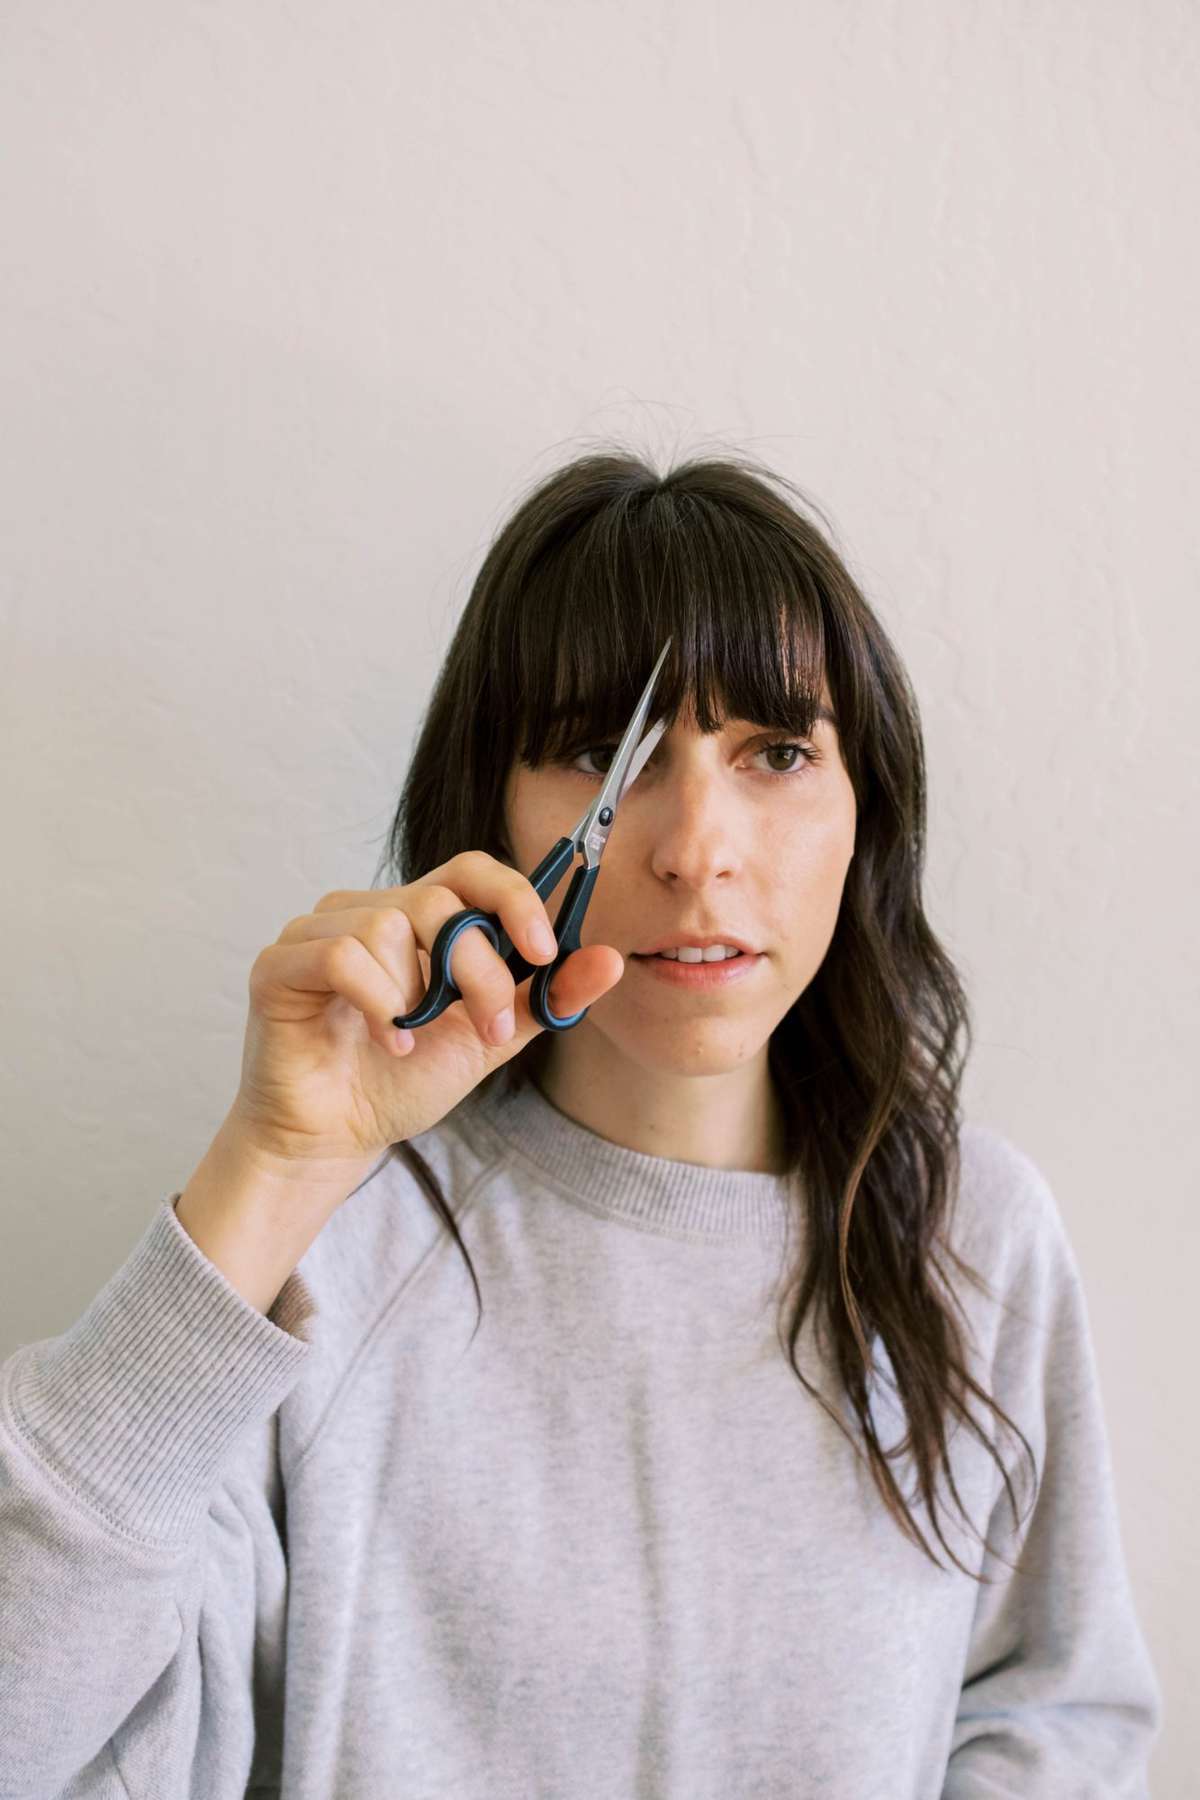 WINGING IT: How to Trim Your Own Hair at Home